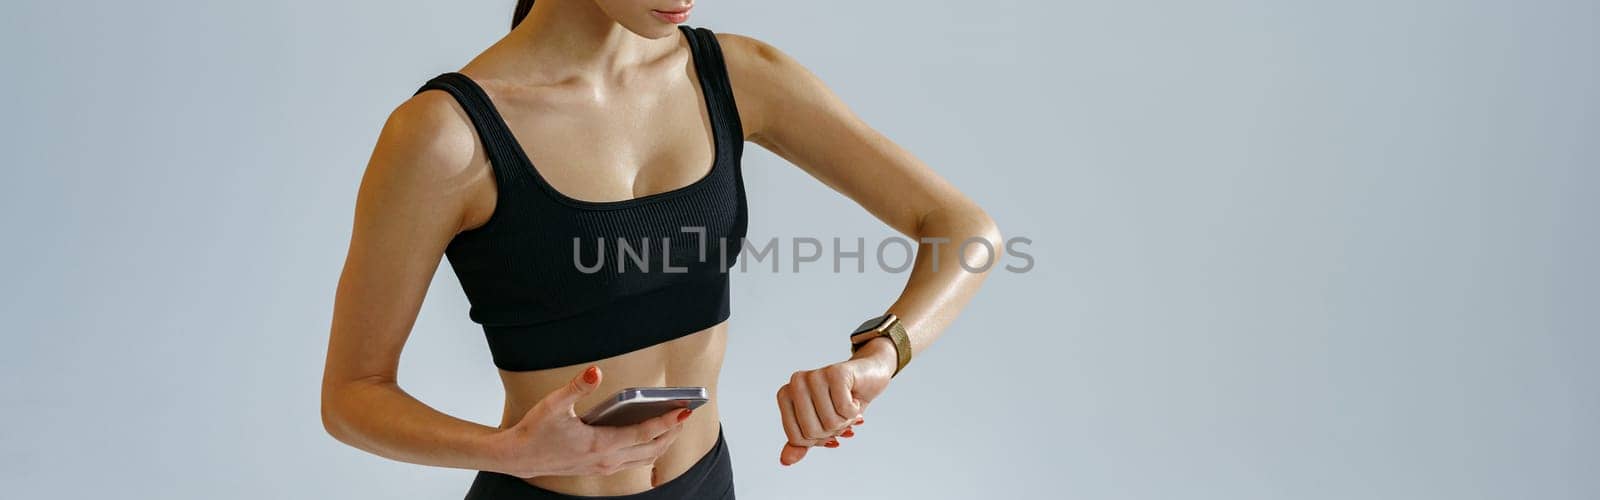 Athletic woman checking her smartwatch after training over studio background by Yaroslav_astakhov